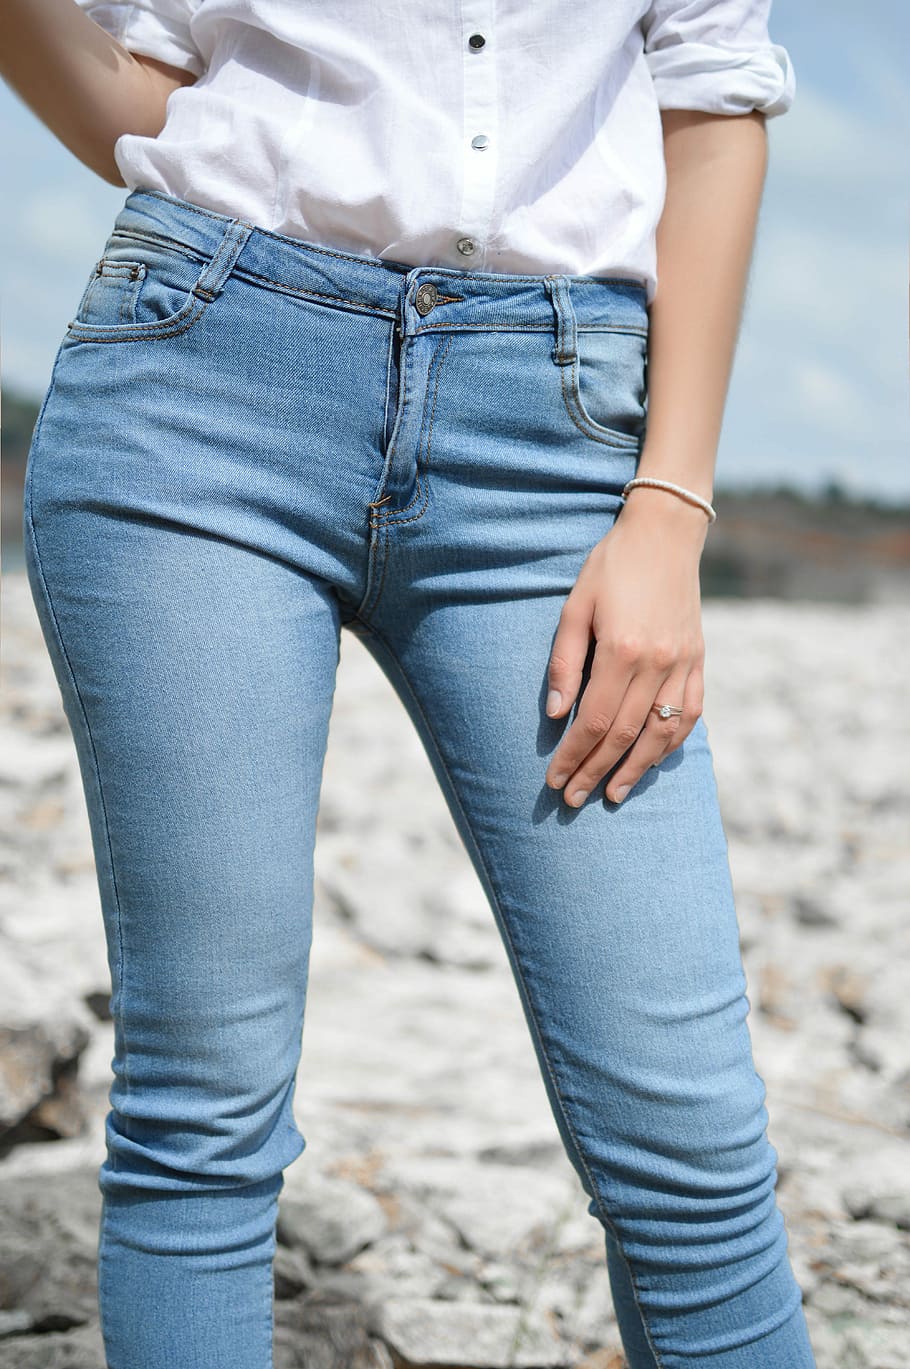 Best Poses For Girls in Jeans (2023)-thanhphatduhoc.com.vn